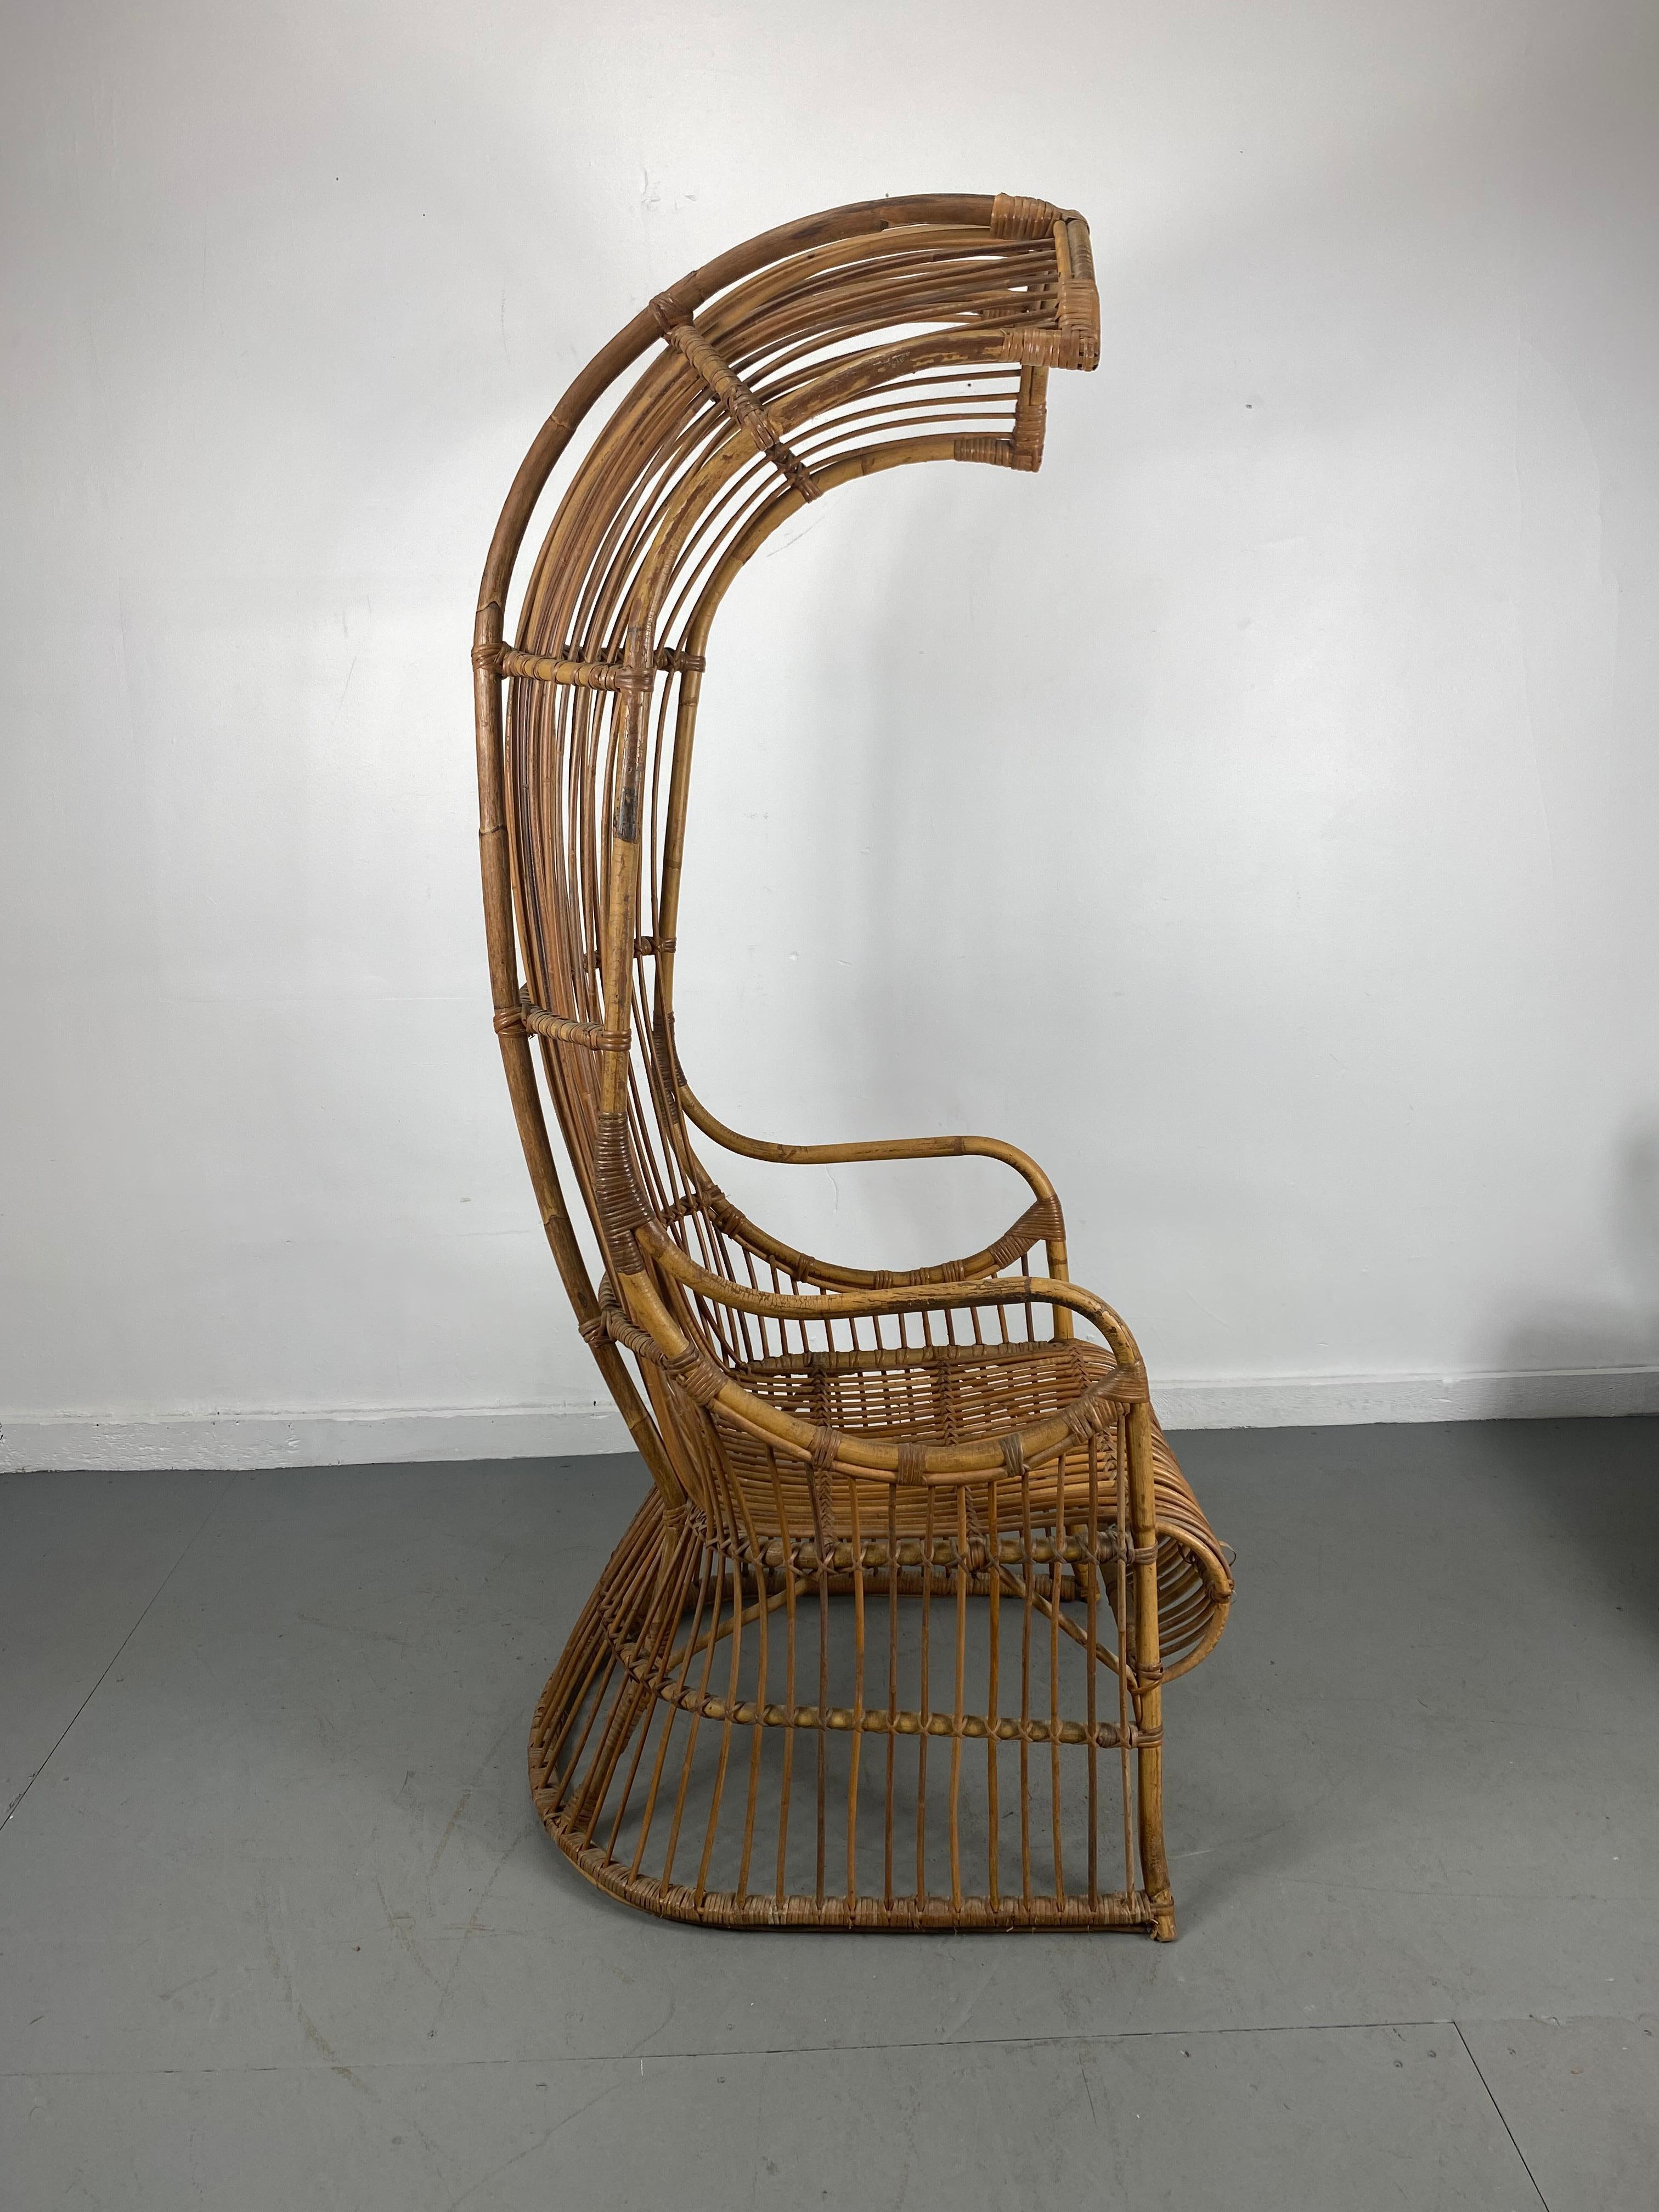 Unusual Mid-Century Modern bamboo /split reed hooded throne chair attributed to Franco Albini, dramatic design. Hand delivery avail to New York City or anywhere en route from Buffalo NY.